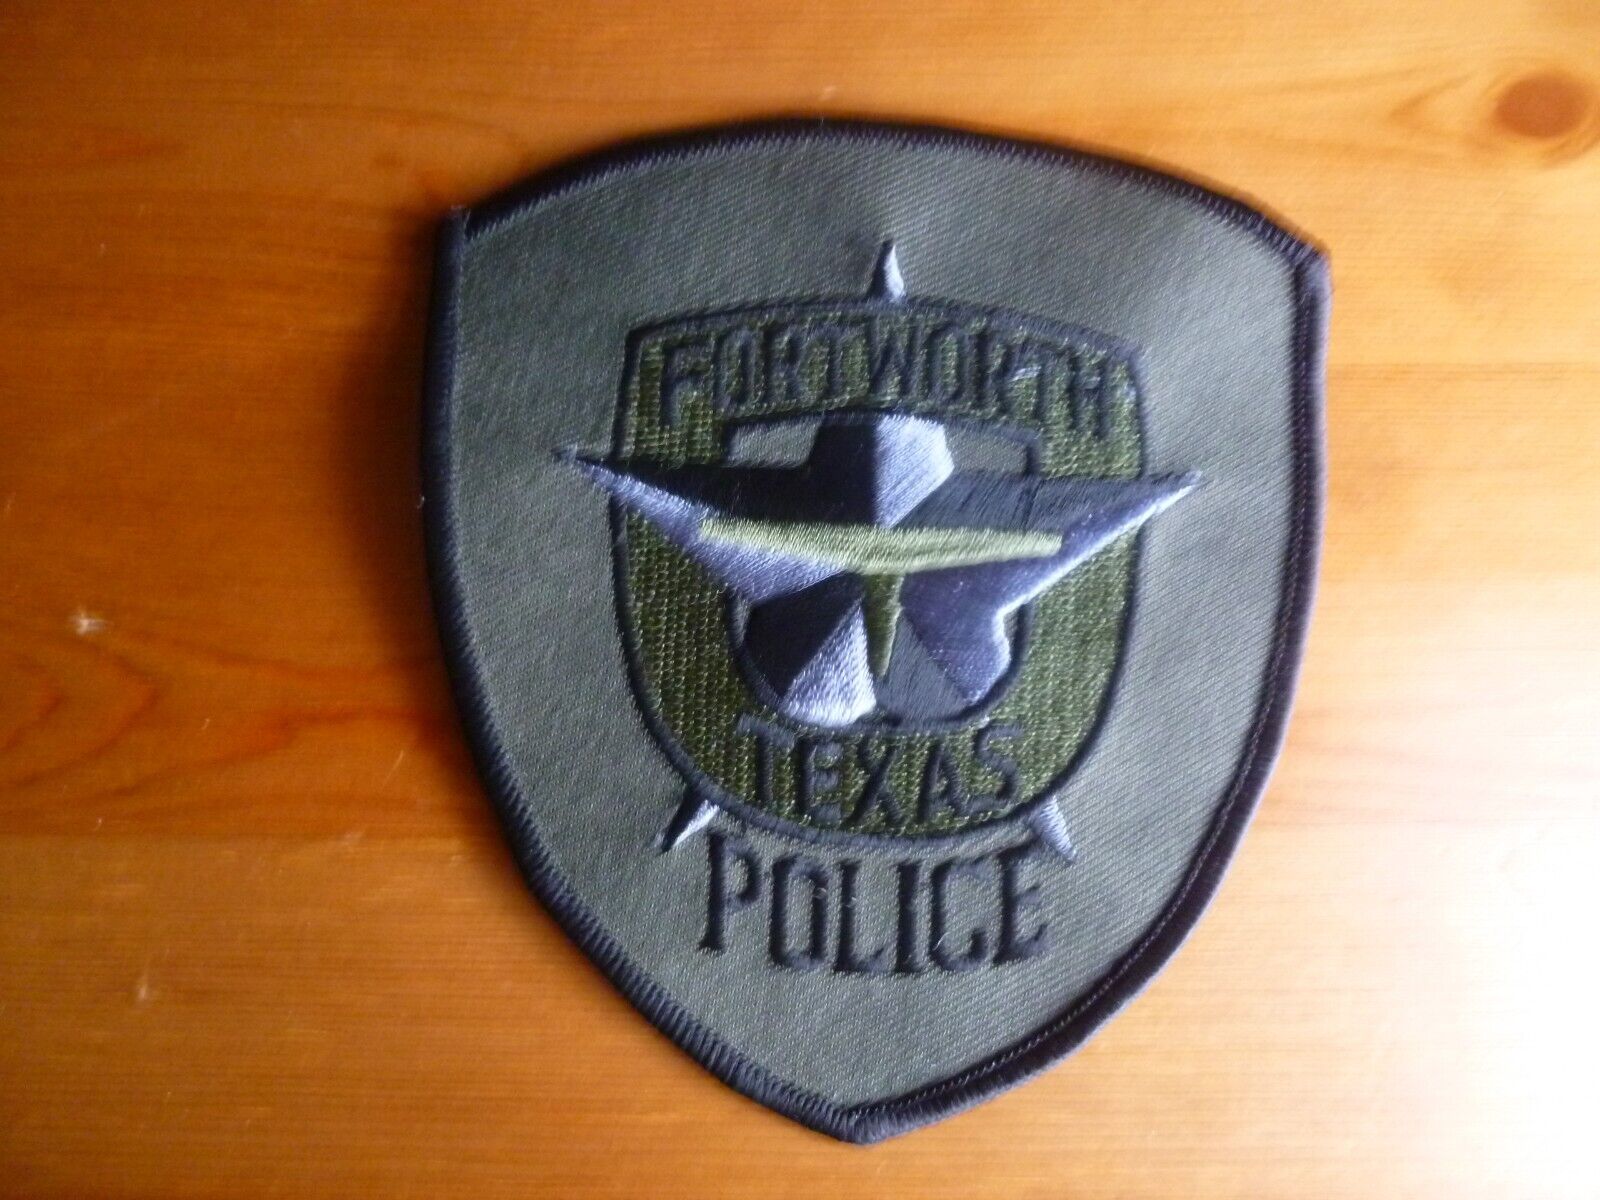 FORT WORTH TEXAS STATE POLICE Patch Camo Unit USA obsolete Original